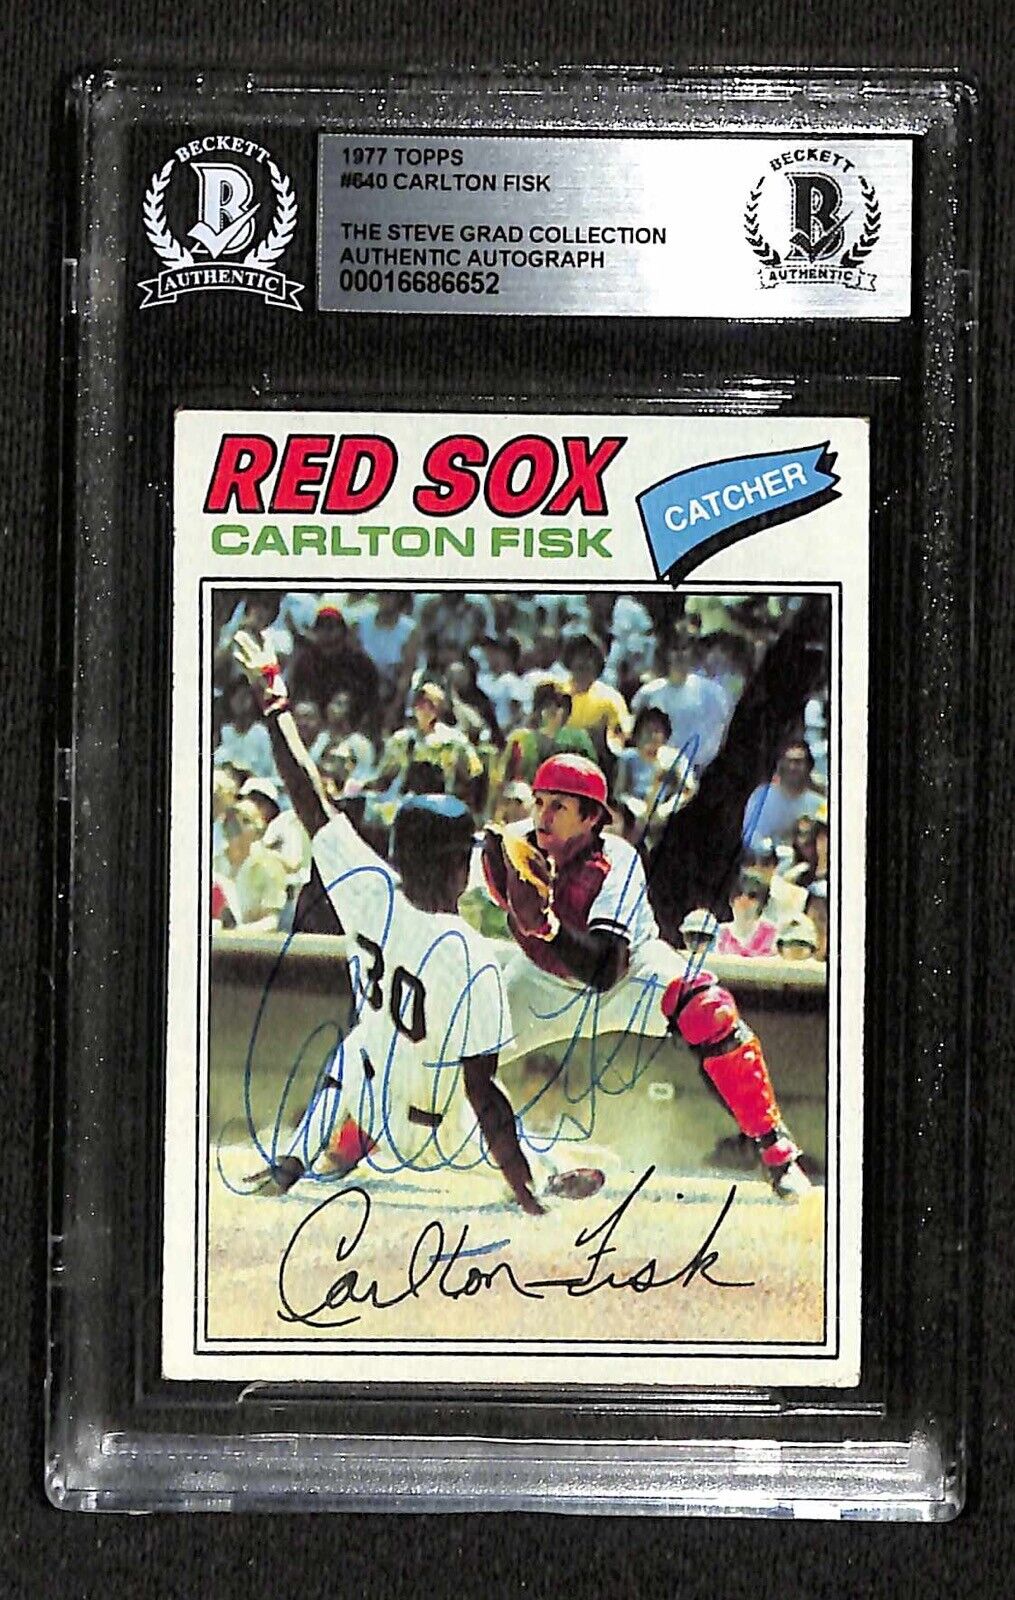 1977 Topps #640 Carlton Fisk VINTAGE Signed Card BECKETT (Grad Collection)